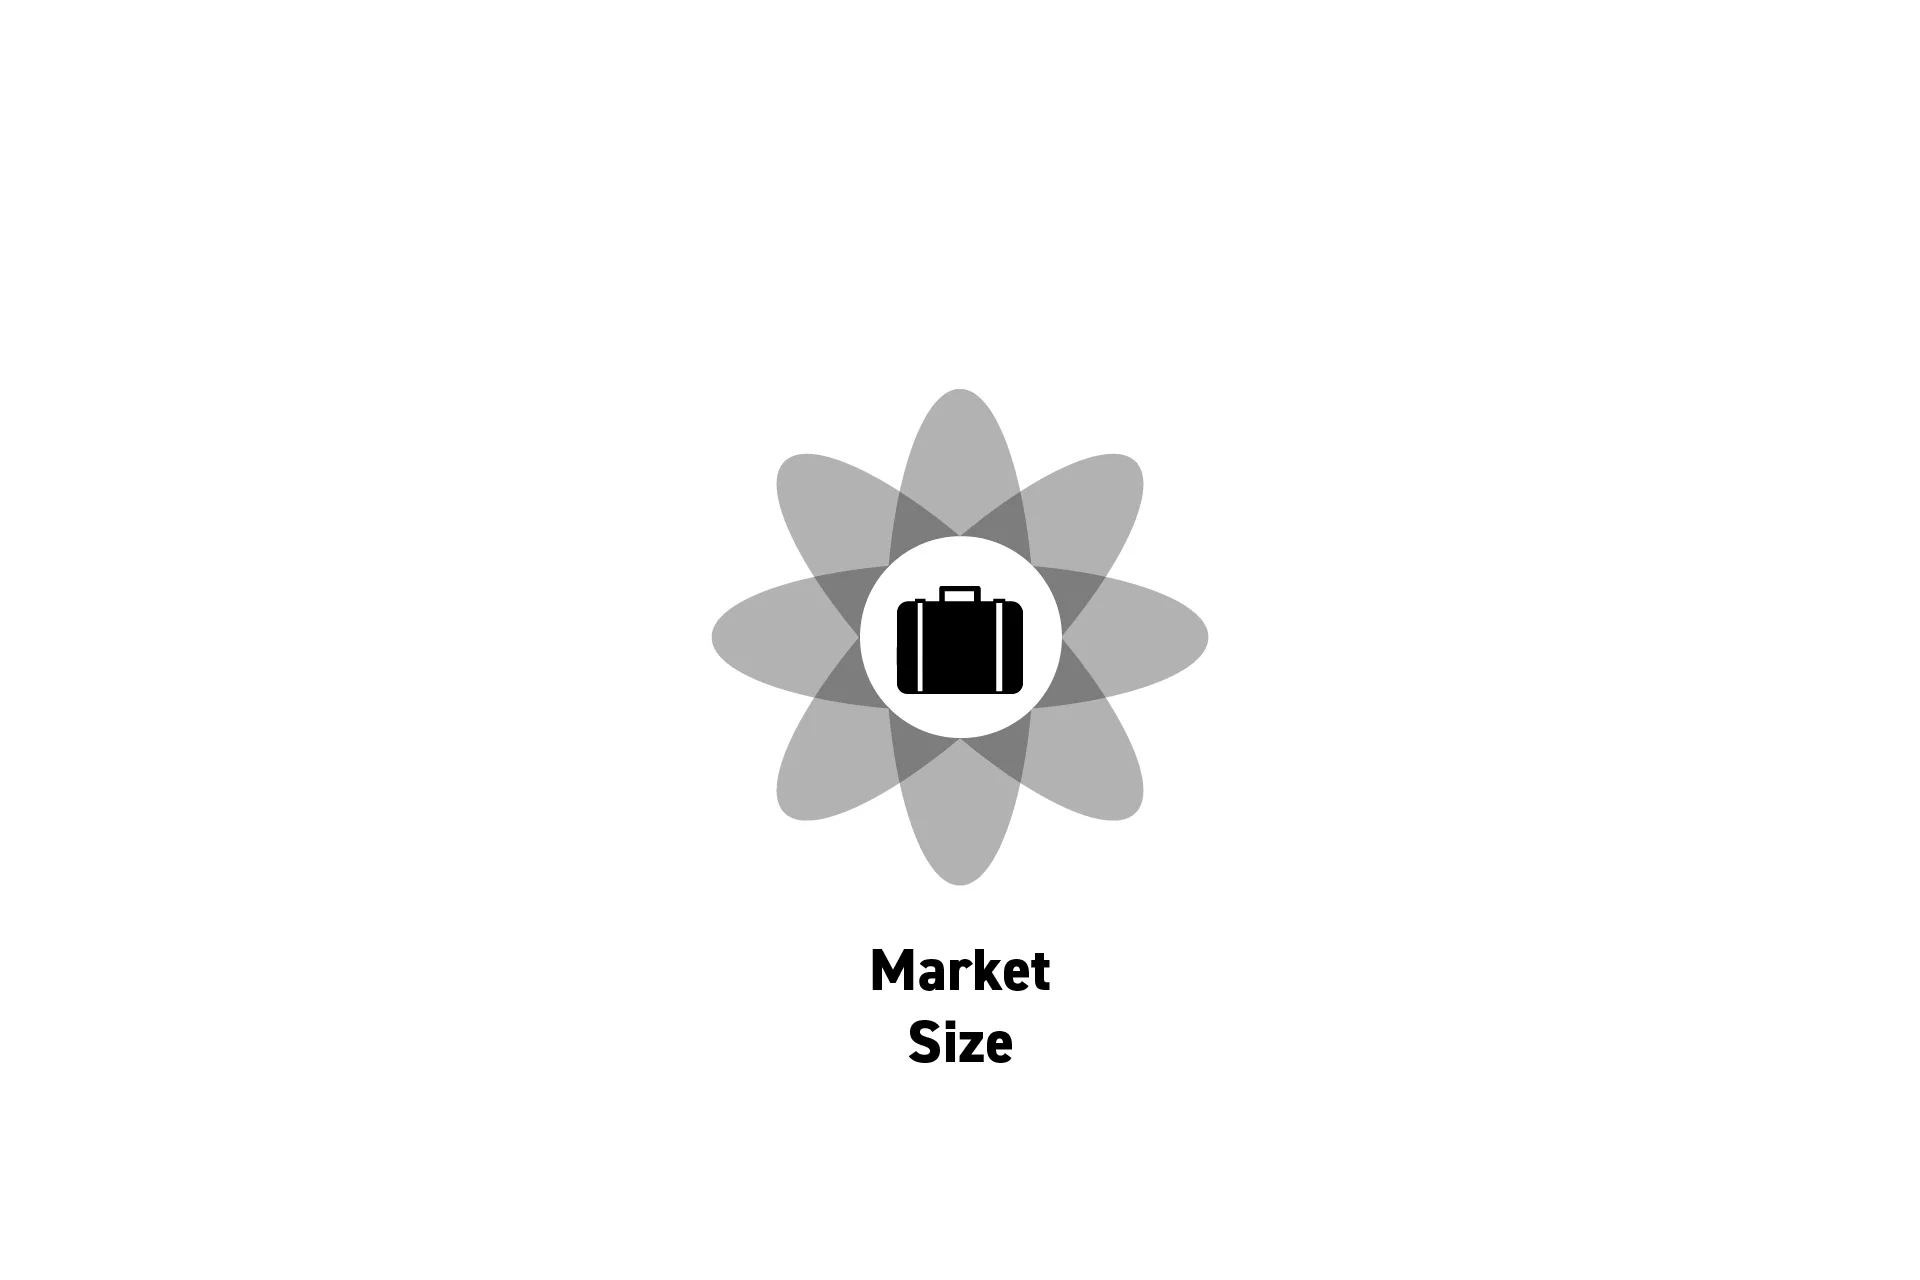 <p>A flower that represents business with the text "Market Size" beneath it.</p>